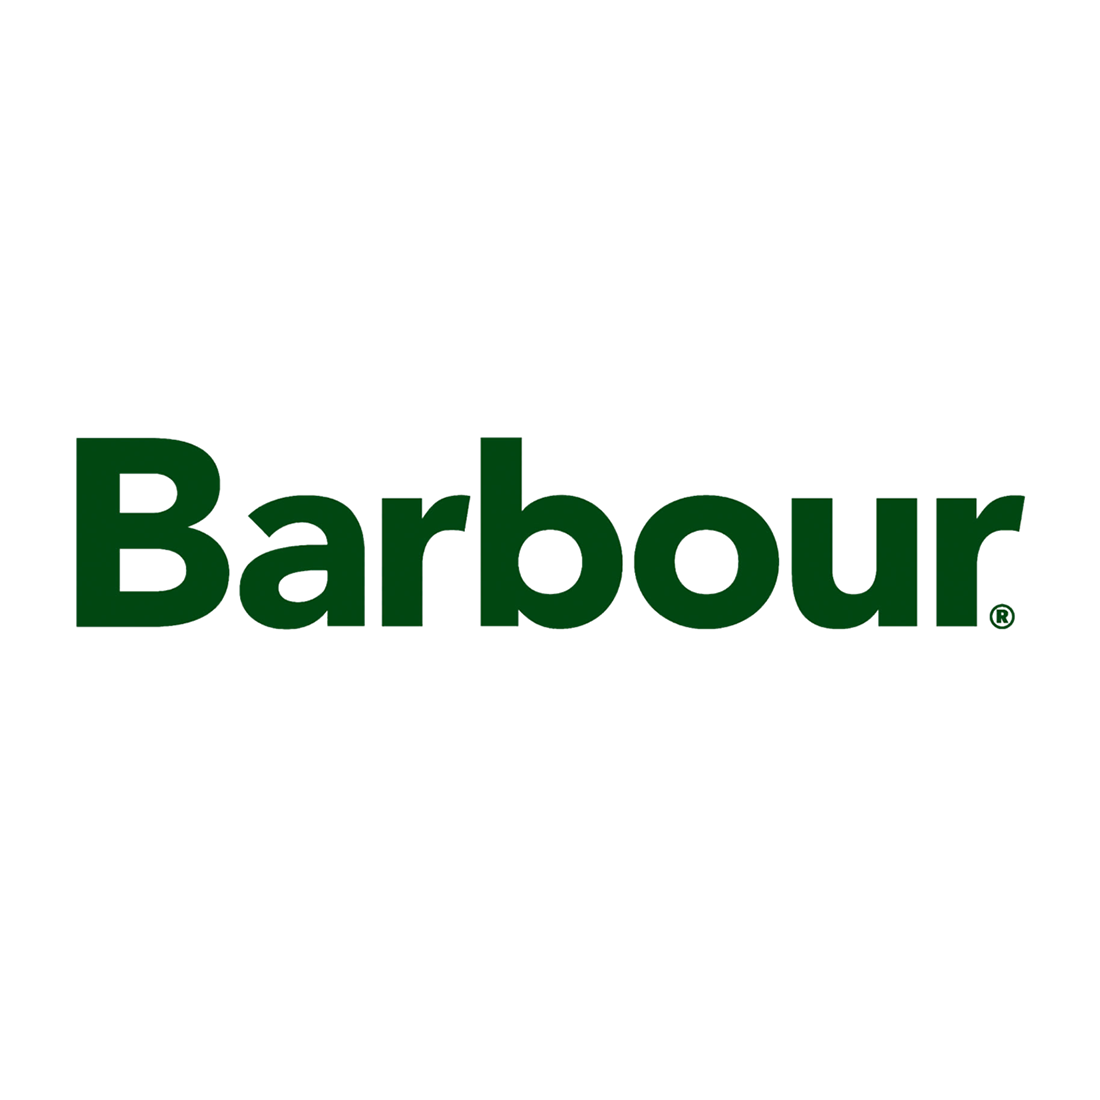 barbour and company